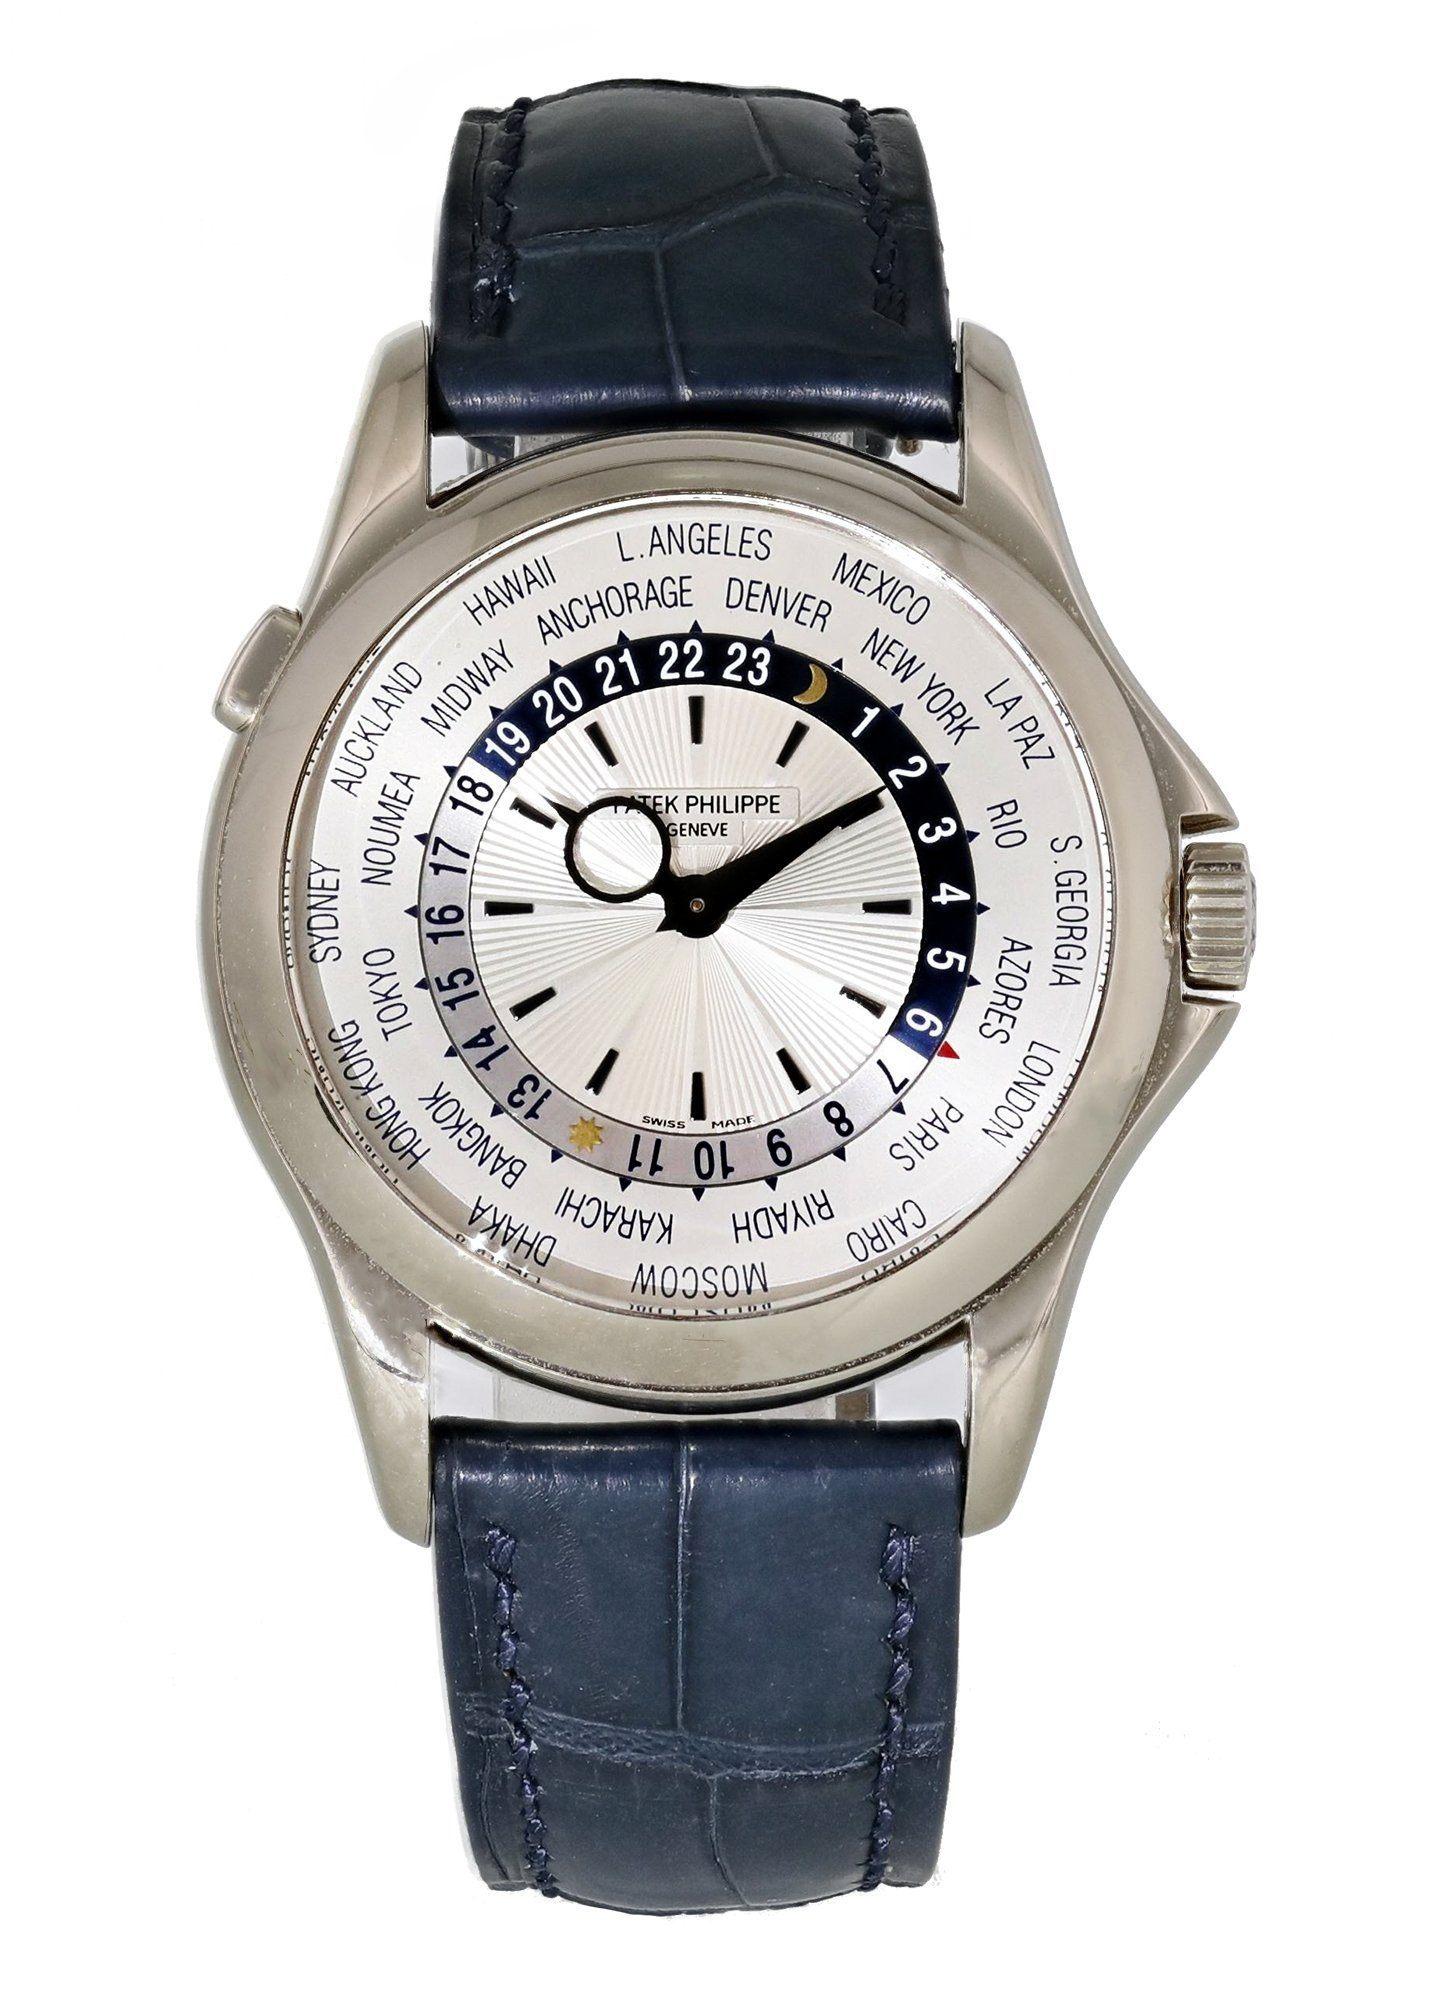 Patek Philippe Complications World Time 5110G-001 Men Watch.
37mm 18K White Gold case. 
White Gold Stationary bezel. 
Silver world time dial with gold hands and index hour markers. 
Blue Aligator Leather Strap with Deployment Clasp. 
Will fit up to